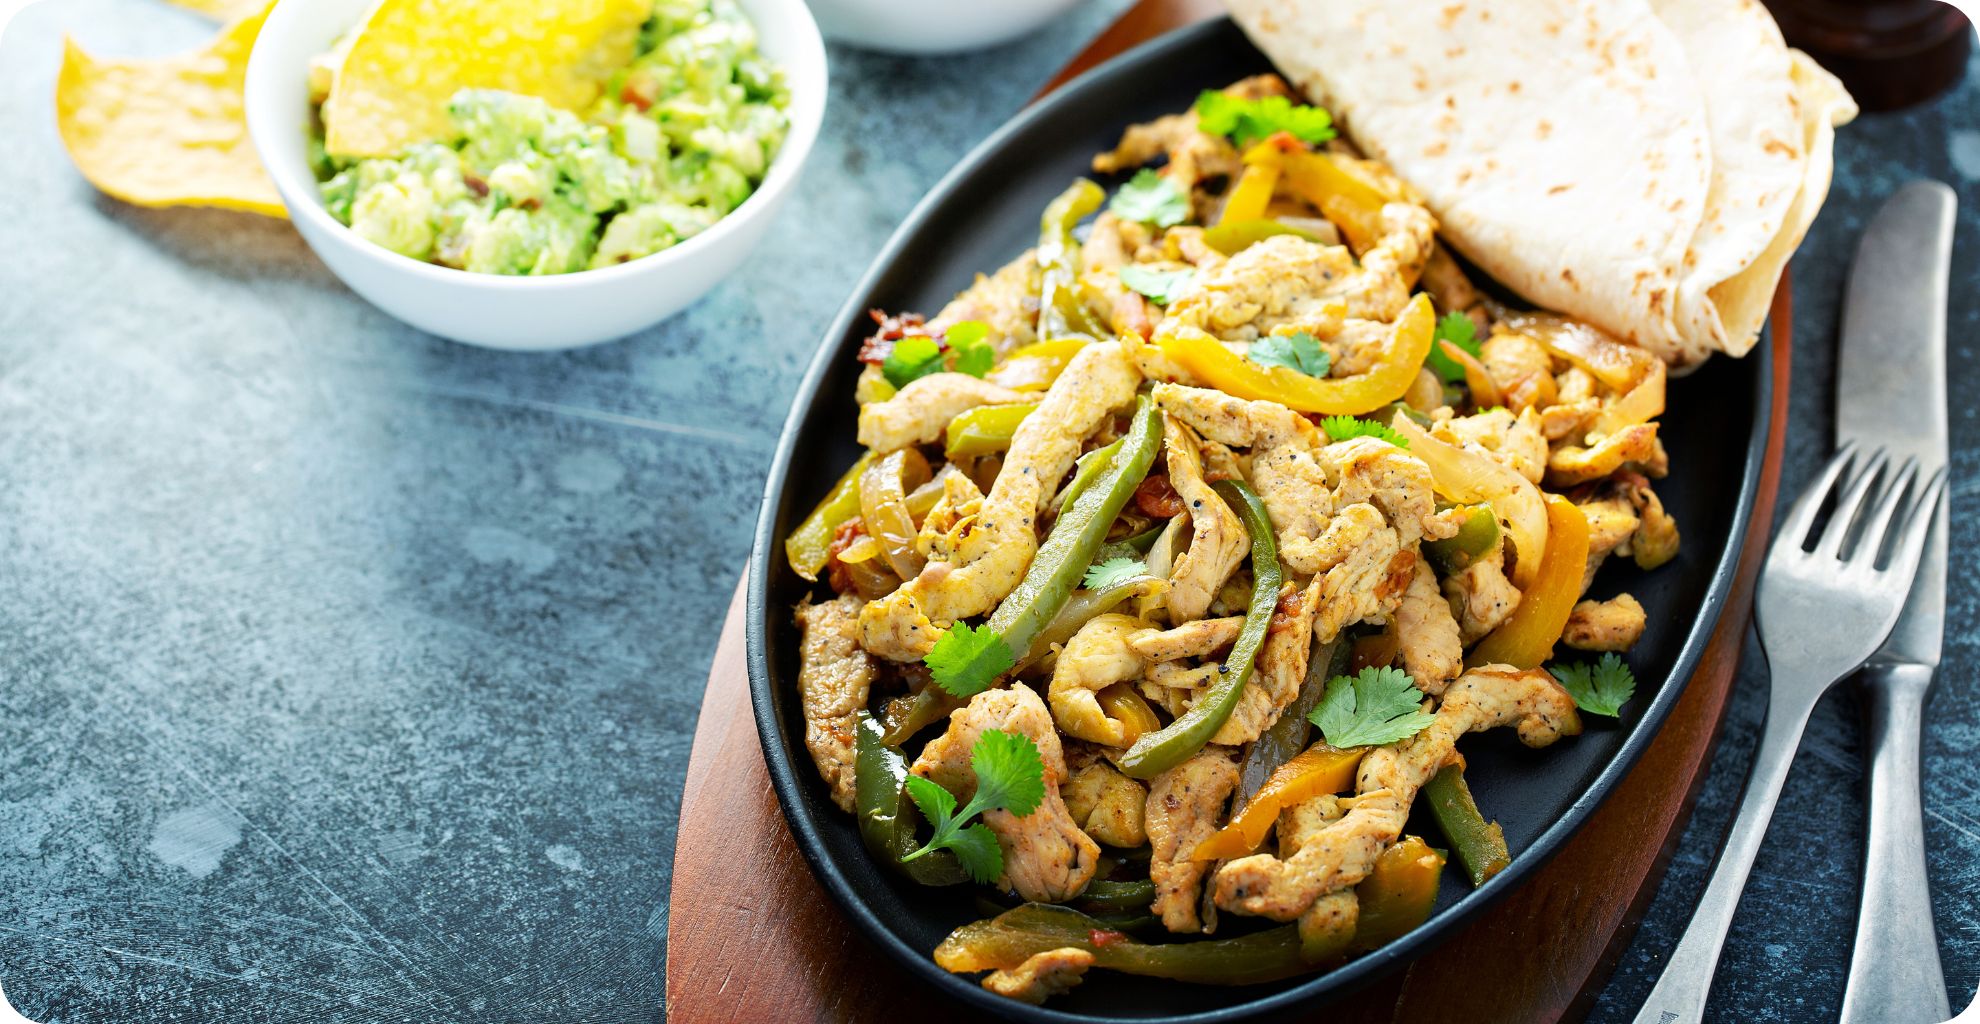 Crispy Chicken Fajitas Recipi with Bell Peppers and Onions